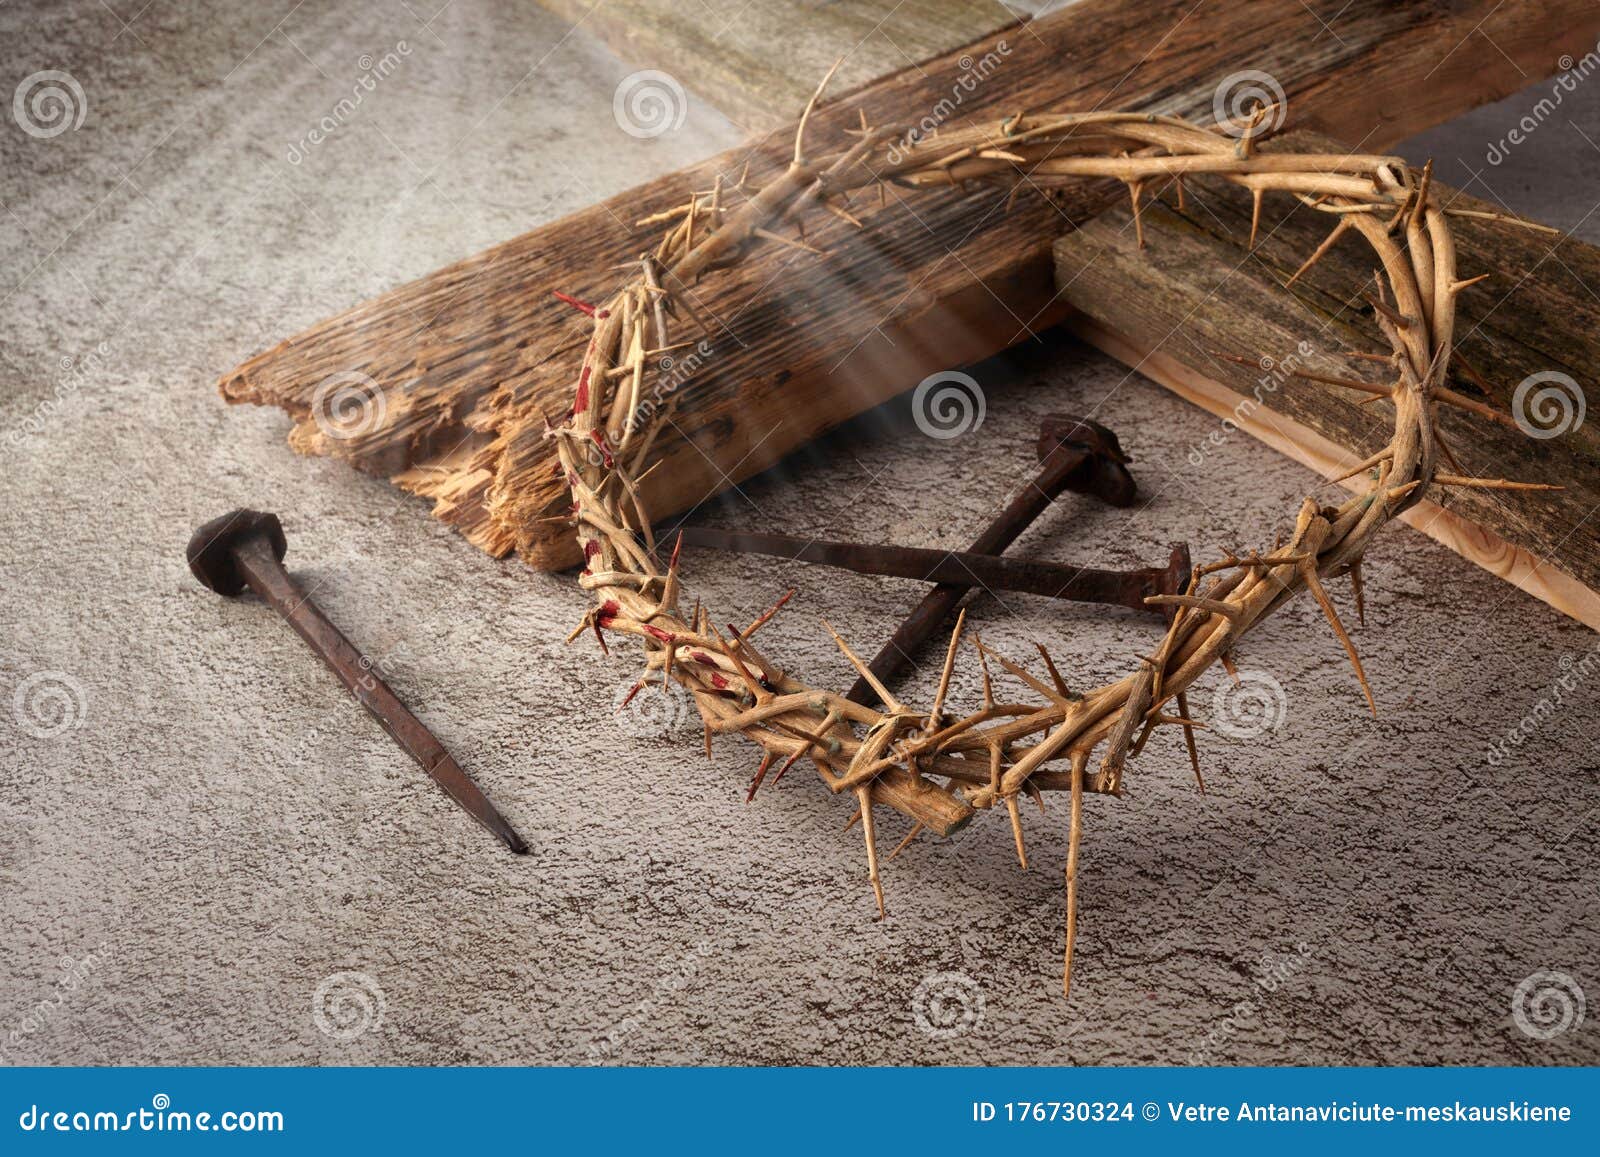 easter background depicting the crucifixion with a rustic wooden cross, crown of thorns and nails.